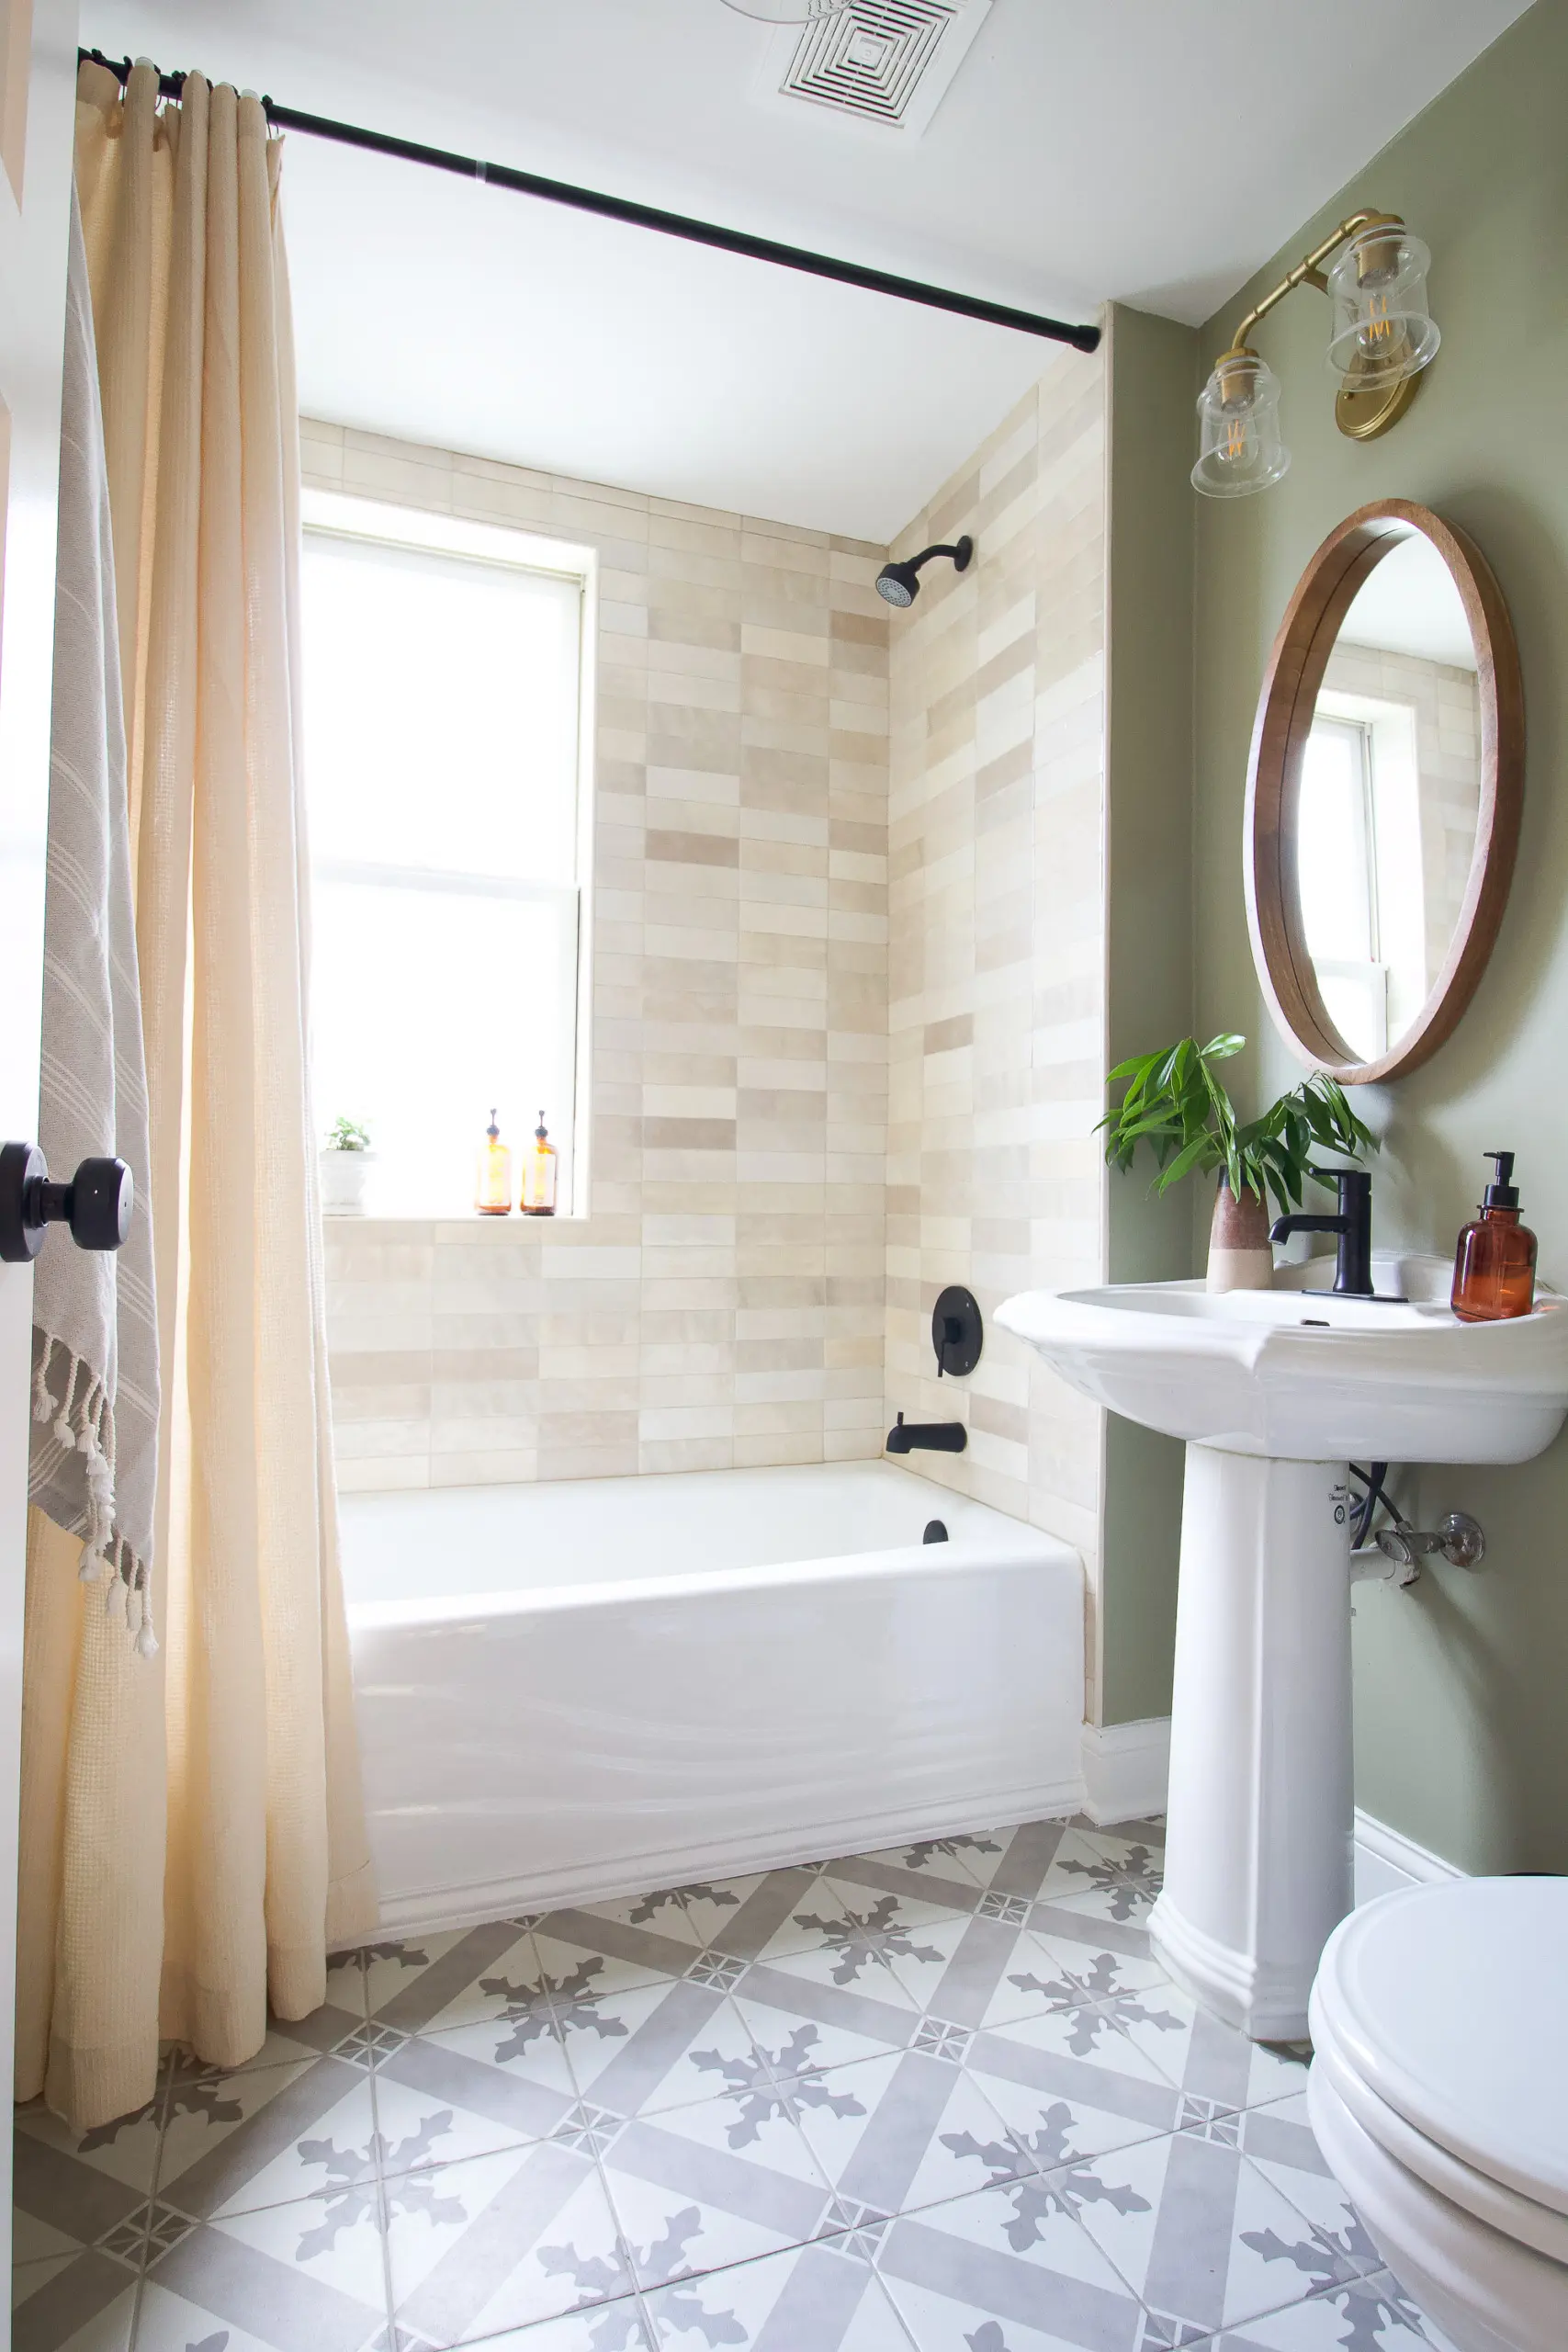 Using creme cloe tile in a shower